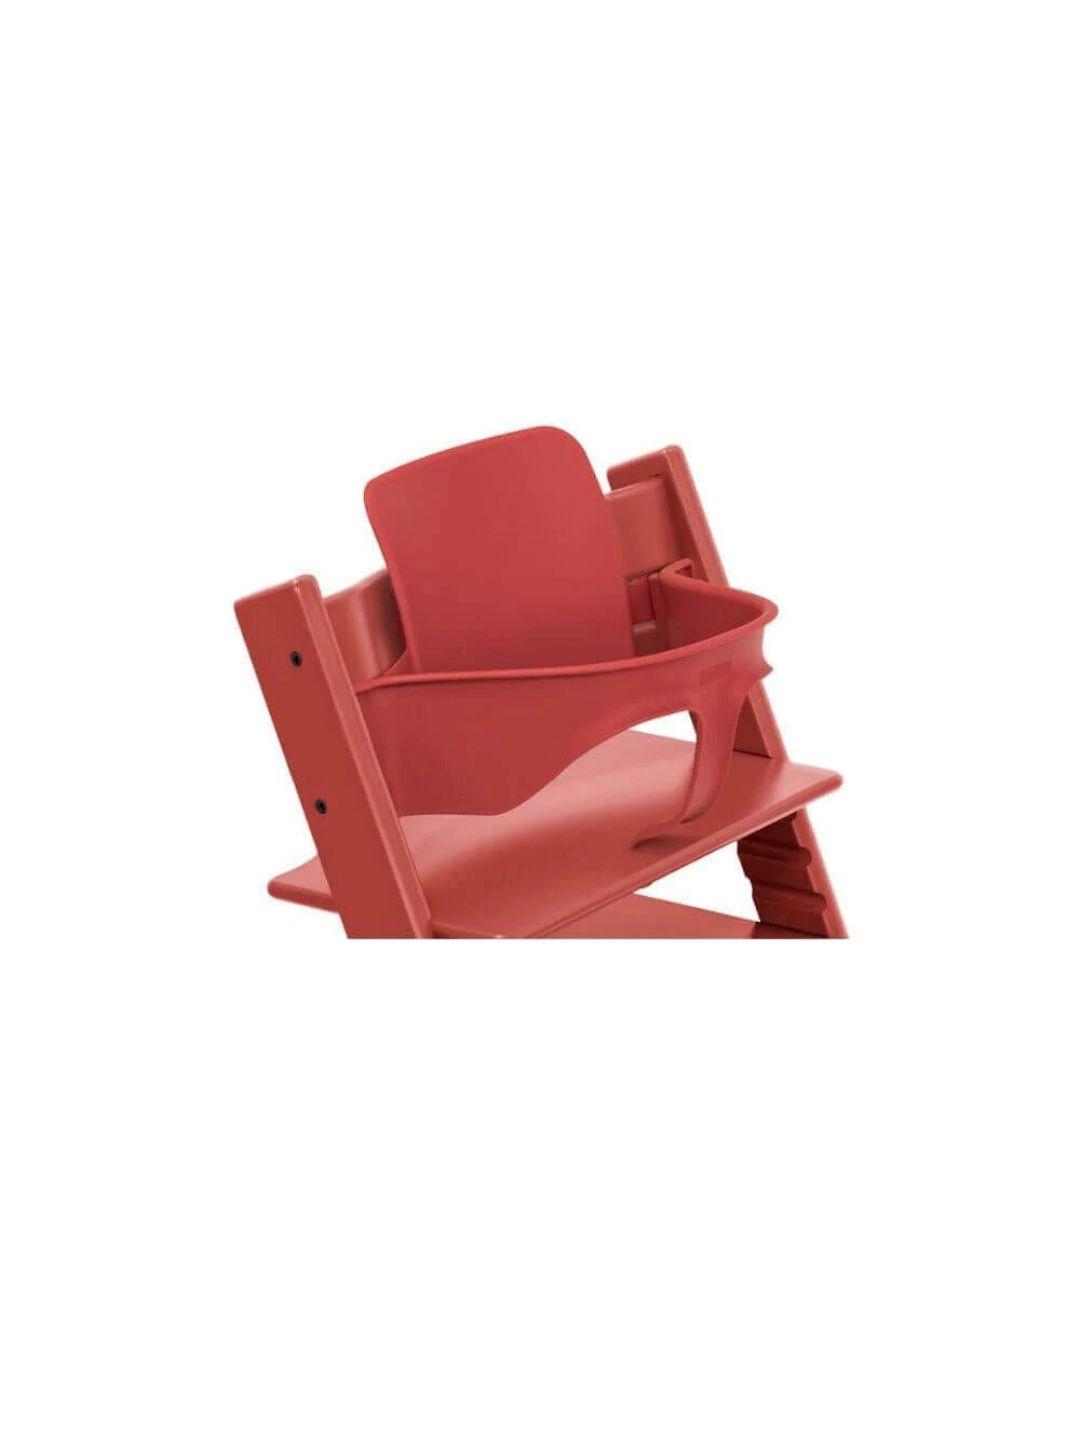 stokke unisex kids red high chairs